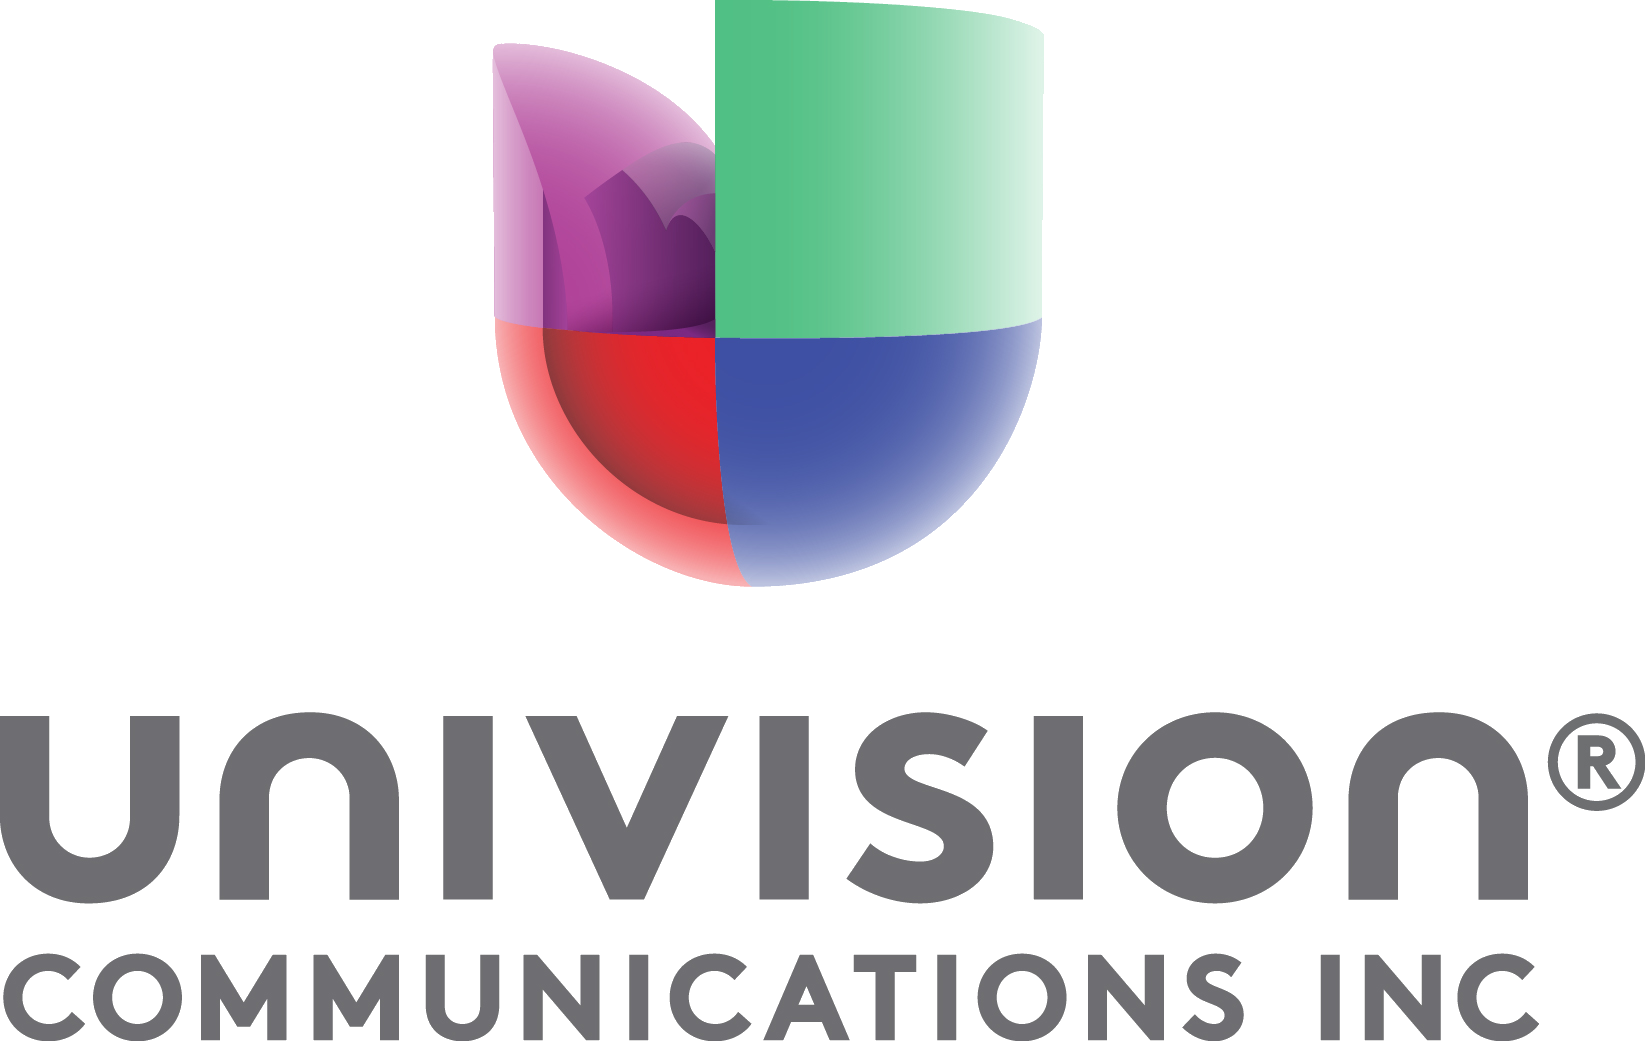 Image New Univision Communications logo.png Logopedia, the logo and